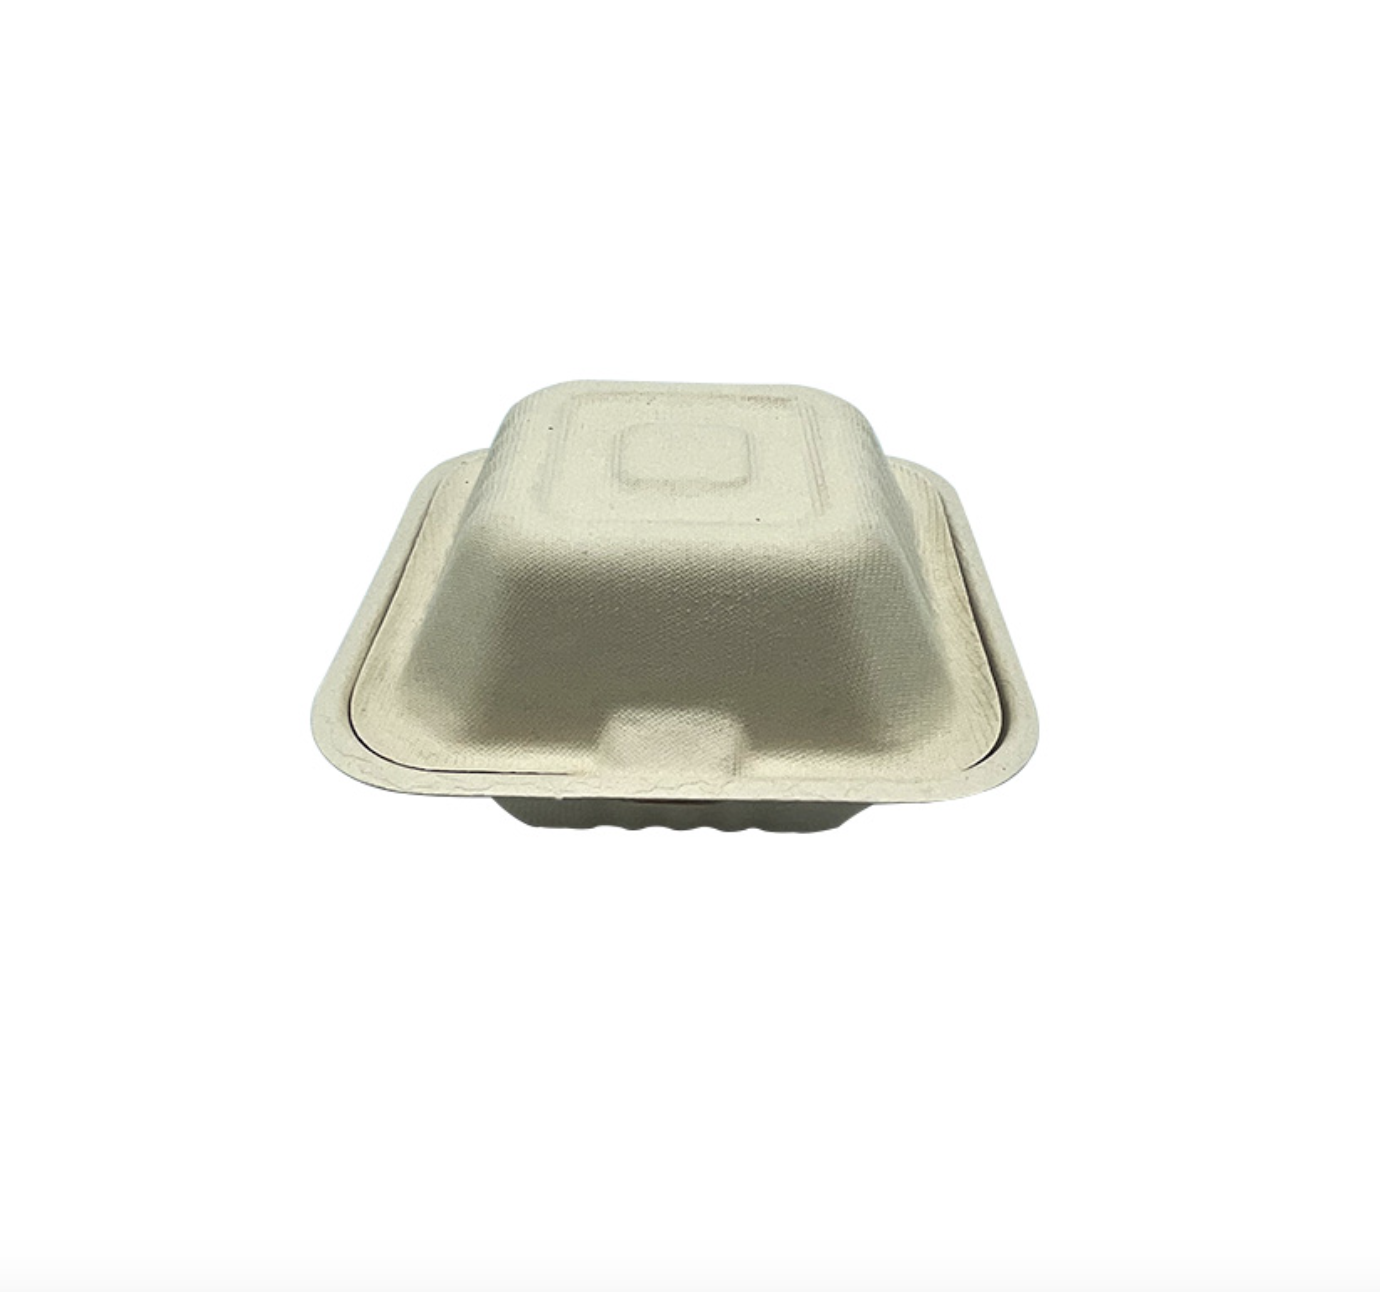 Compostable Large Hinged Deli Containers